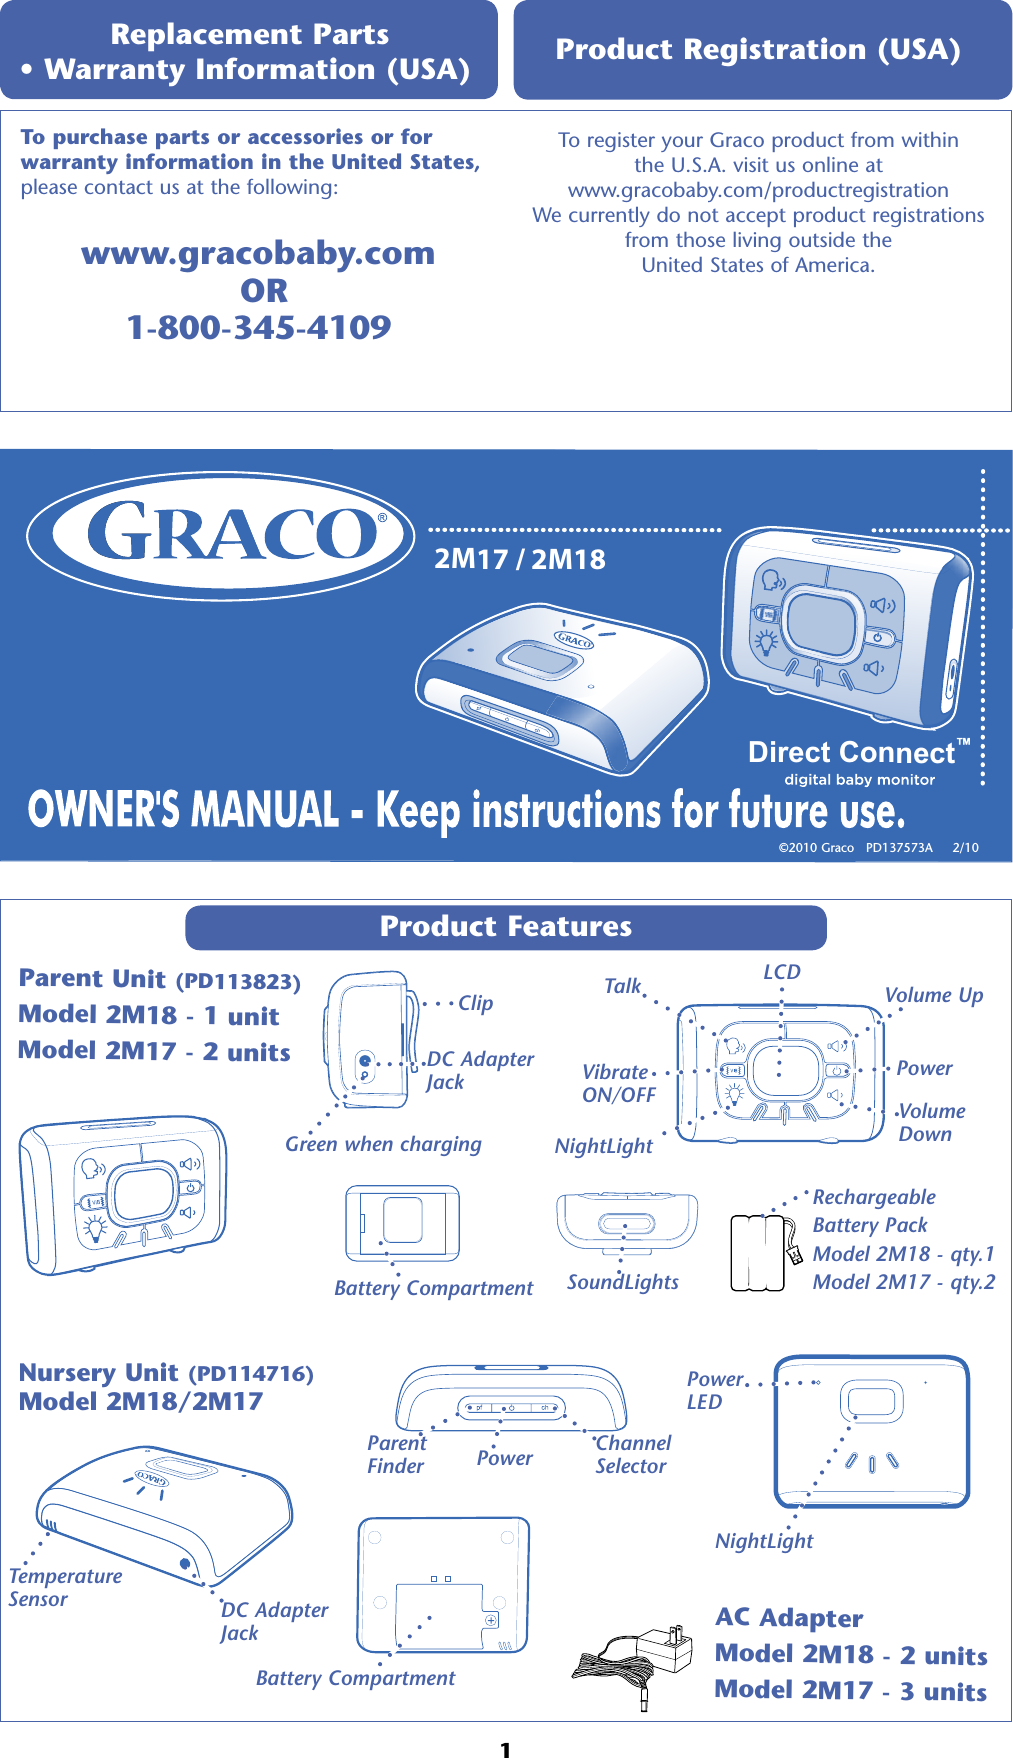 2M17 / 2M18Direct Connect™Product Features Parent Unit (PD113823)Model 2M18 - 1 unitModel 2M17 - 2 units Replacement Parts  • Warranty Information (USA) www.gracobaby.com   OR1-800-345-4109To register your Graco product from within  the U.S.A. visit us online at  www.gracobaby.com/productregistration  We currently do not accept product registrations  from those living outside the  United States of America. Product Registration (USA) To purchase parts or accessories or for  warranty information in the United States, please contact us at the following:©2010 Graco   PD137573A     2/10 Nursery Unit (PD114716)Model 2M18/2M17ClipDC Adapter  JackGreen when chargingSoundLightsBattery Compartment1LCDVolume Up Volume  Down Power TalkNightLightVibrate ON/OFFAC AdapterModel 2M18 - 2 unitsModel 2M17 - 3 unitsDC Adapter  JackBattery CompartmentPower Parent FinderChannel SelectorNightLightRechargeableBattery PackModel 2M18 - qty.1 Model 2M17 - qty.2 Temperature SensorPower  LED